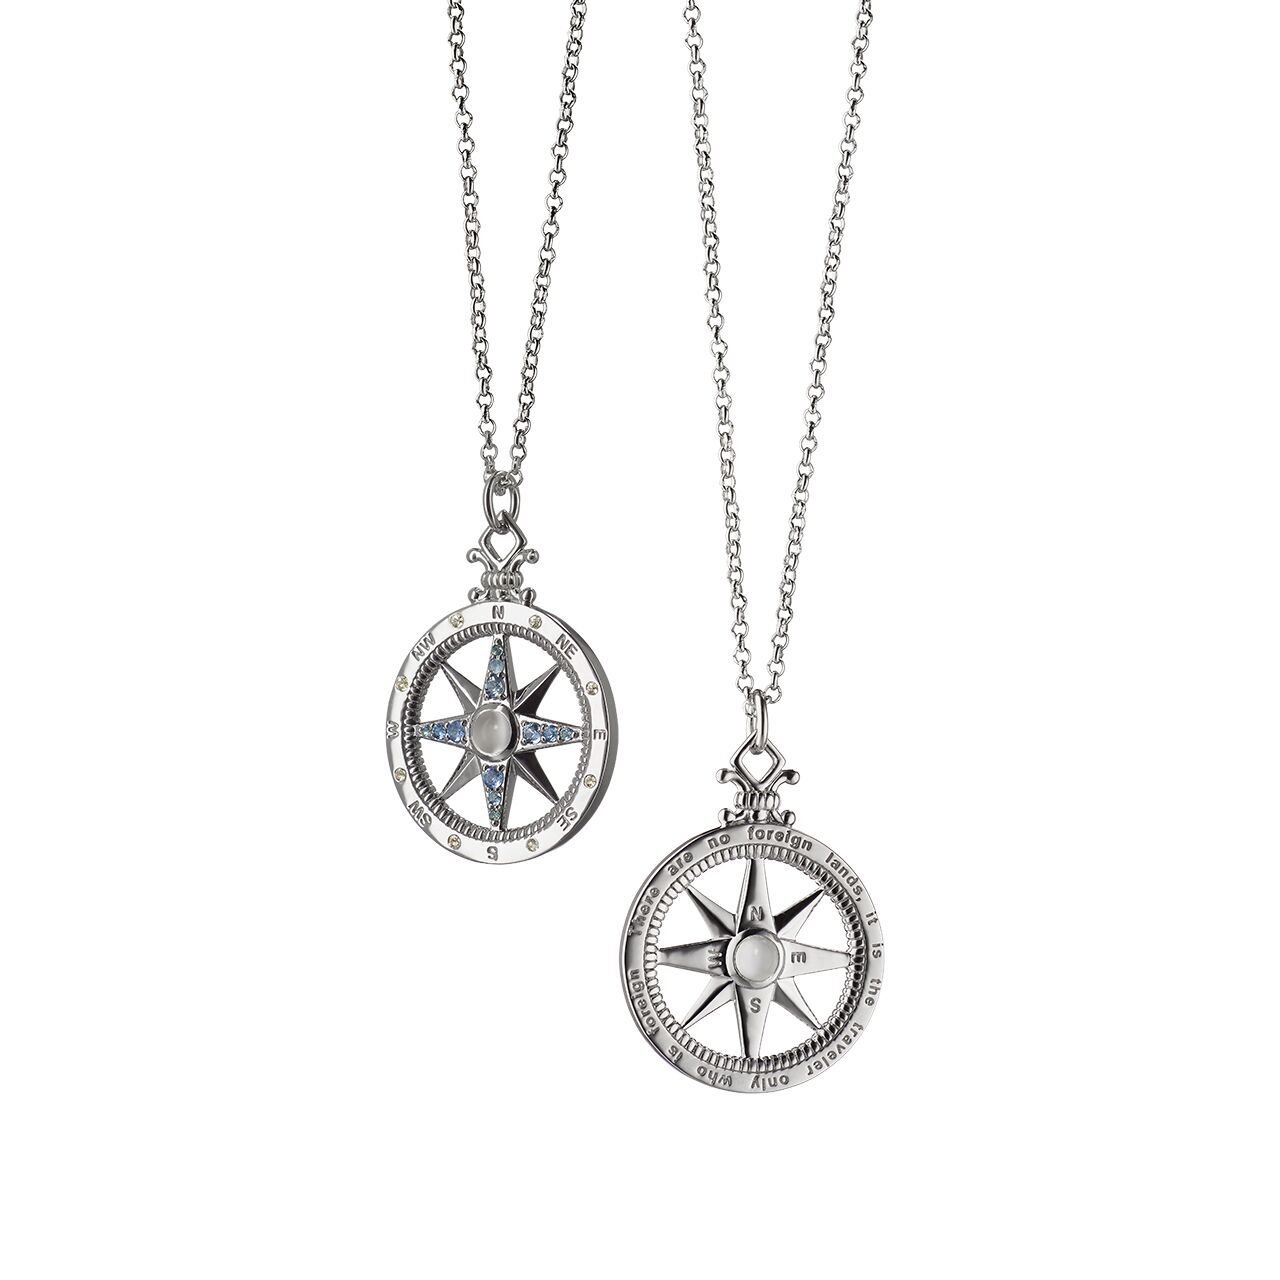 Global Compass Charm (Sterling Silver)